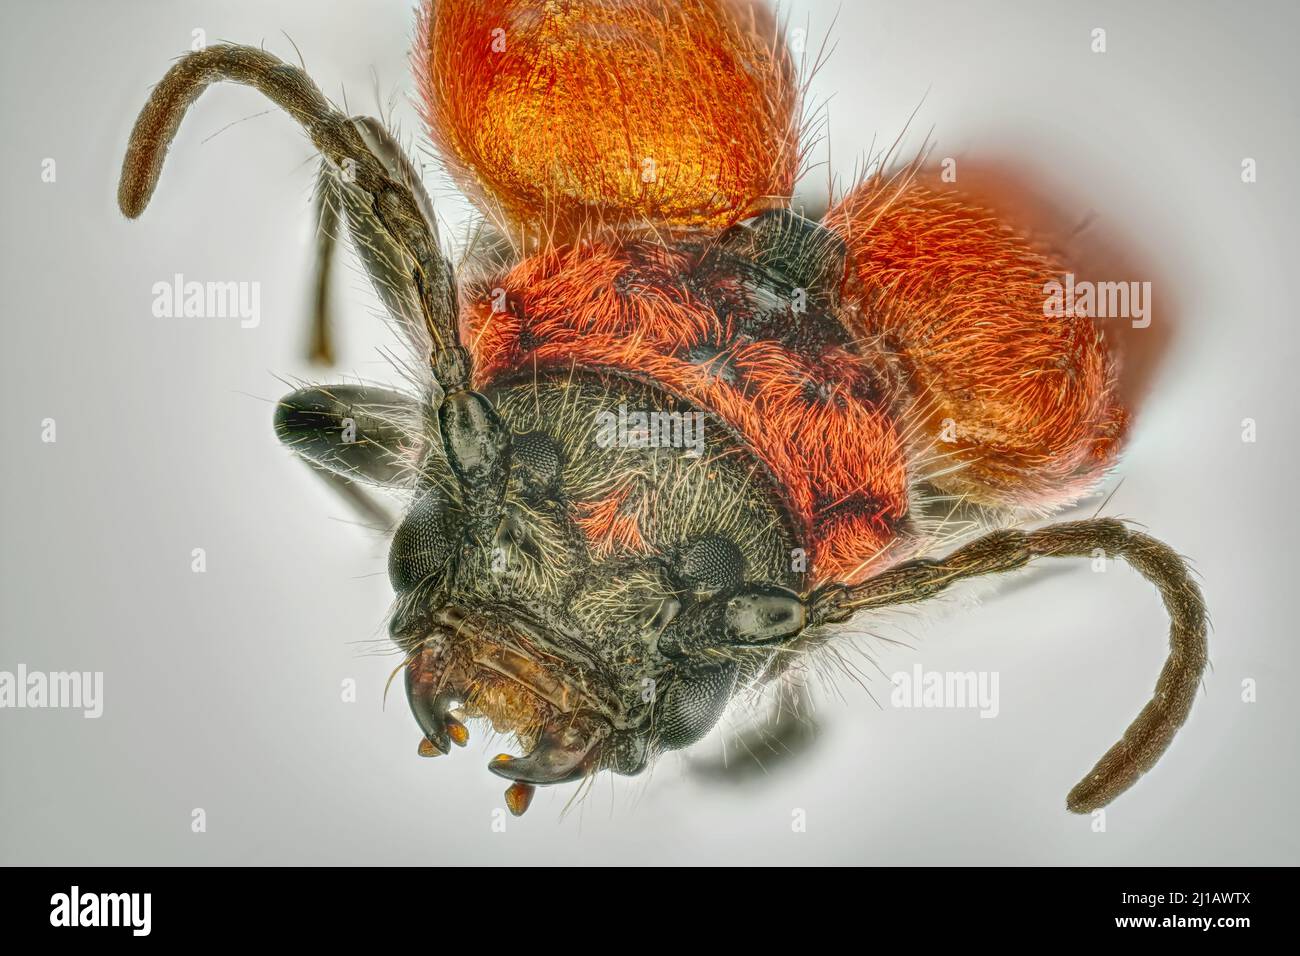 The red-headed beetle (Pyrrhidium sanguineum) or red beetle is a beetle from the l Stock Photo